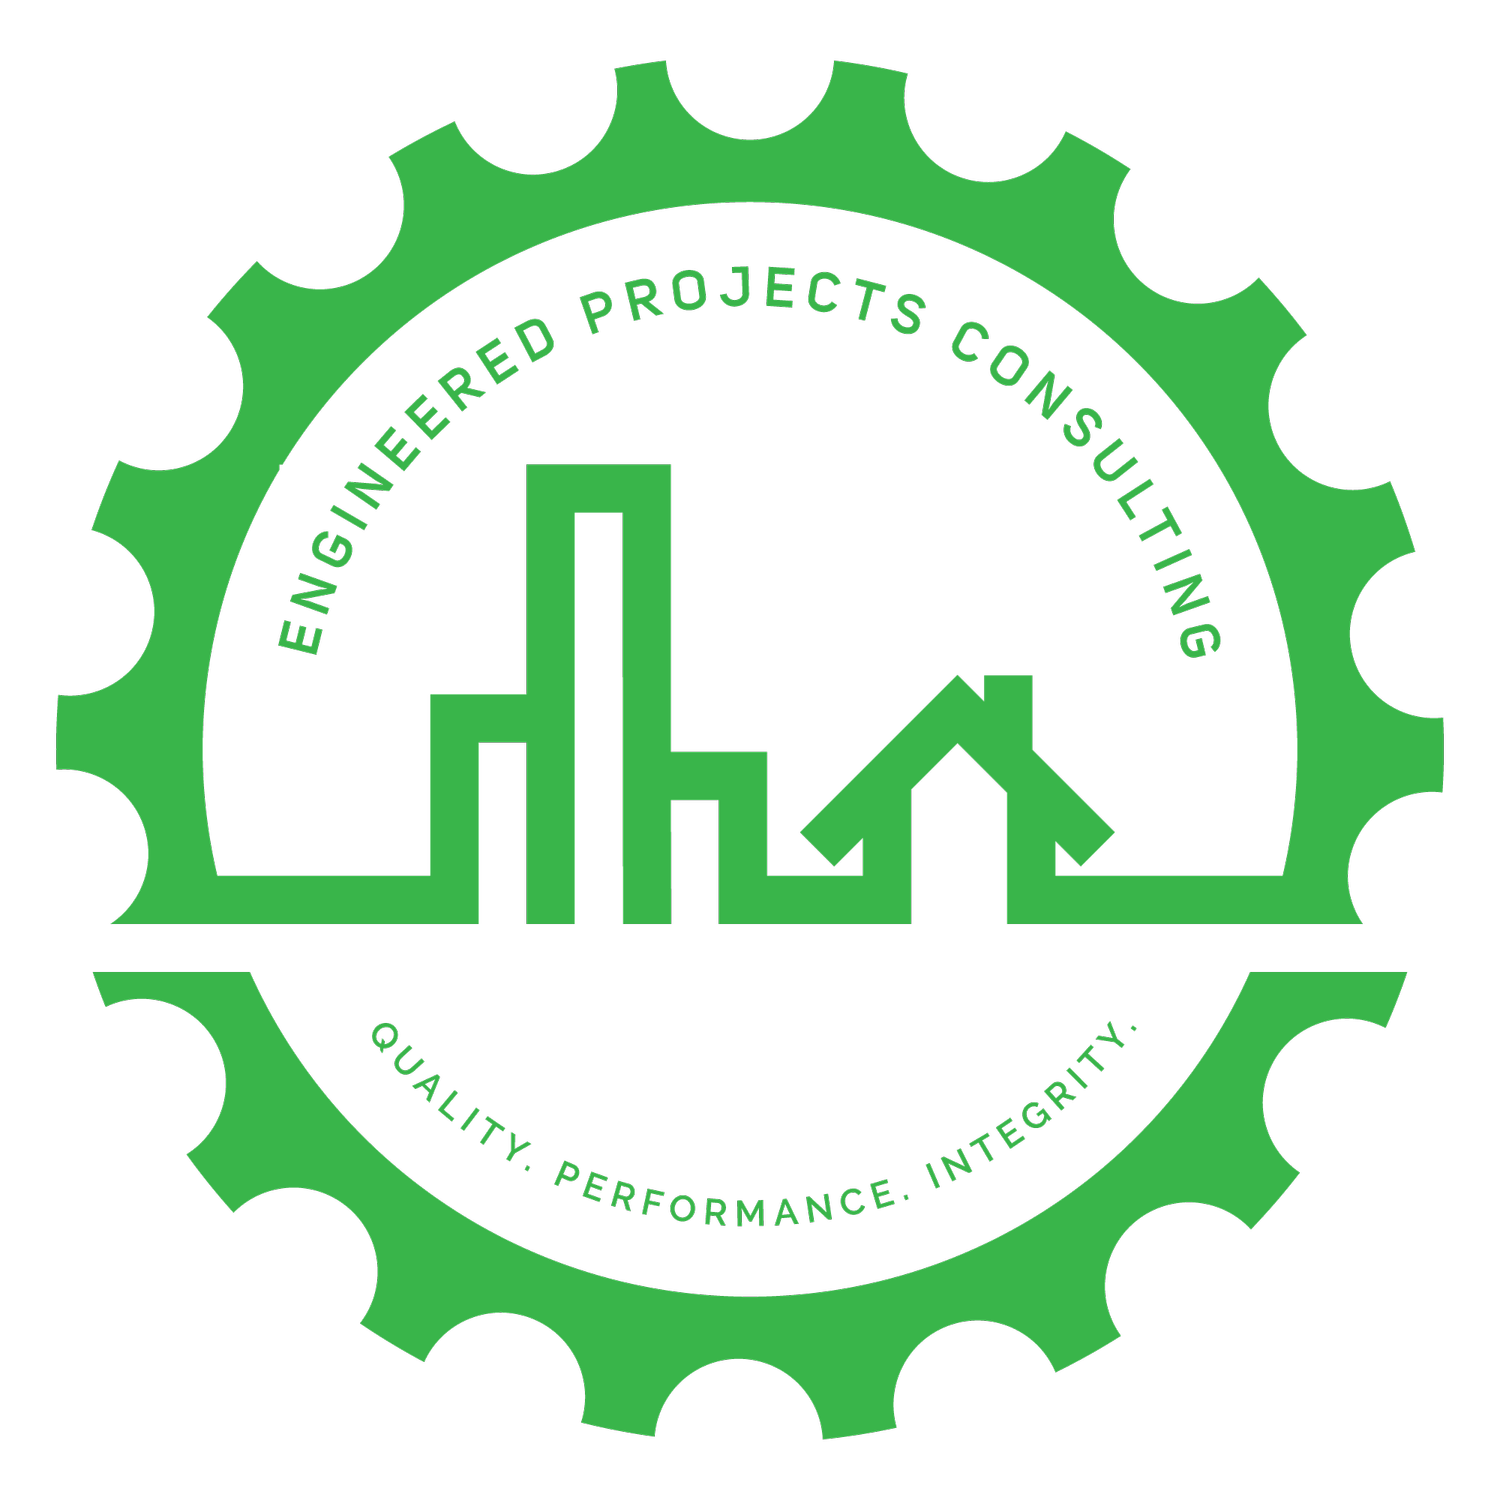 ENGINEERED PROJECTS CONSULTING